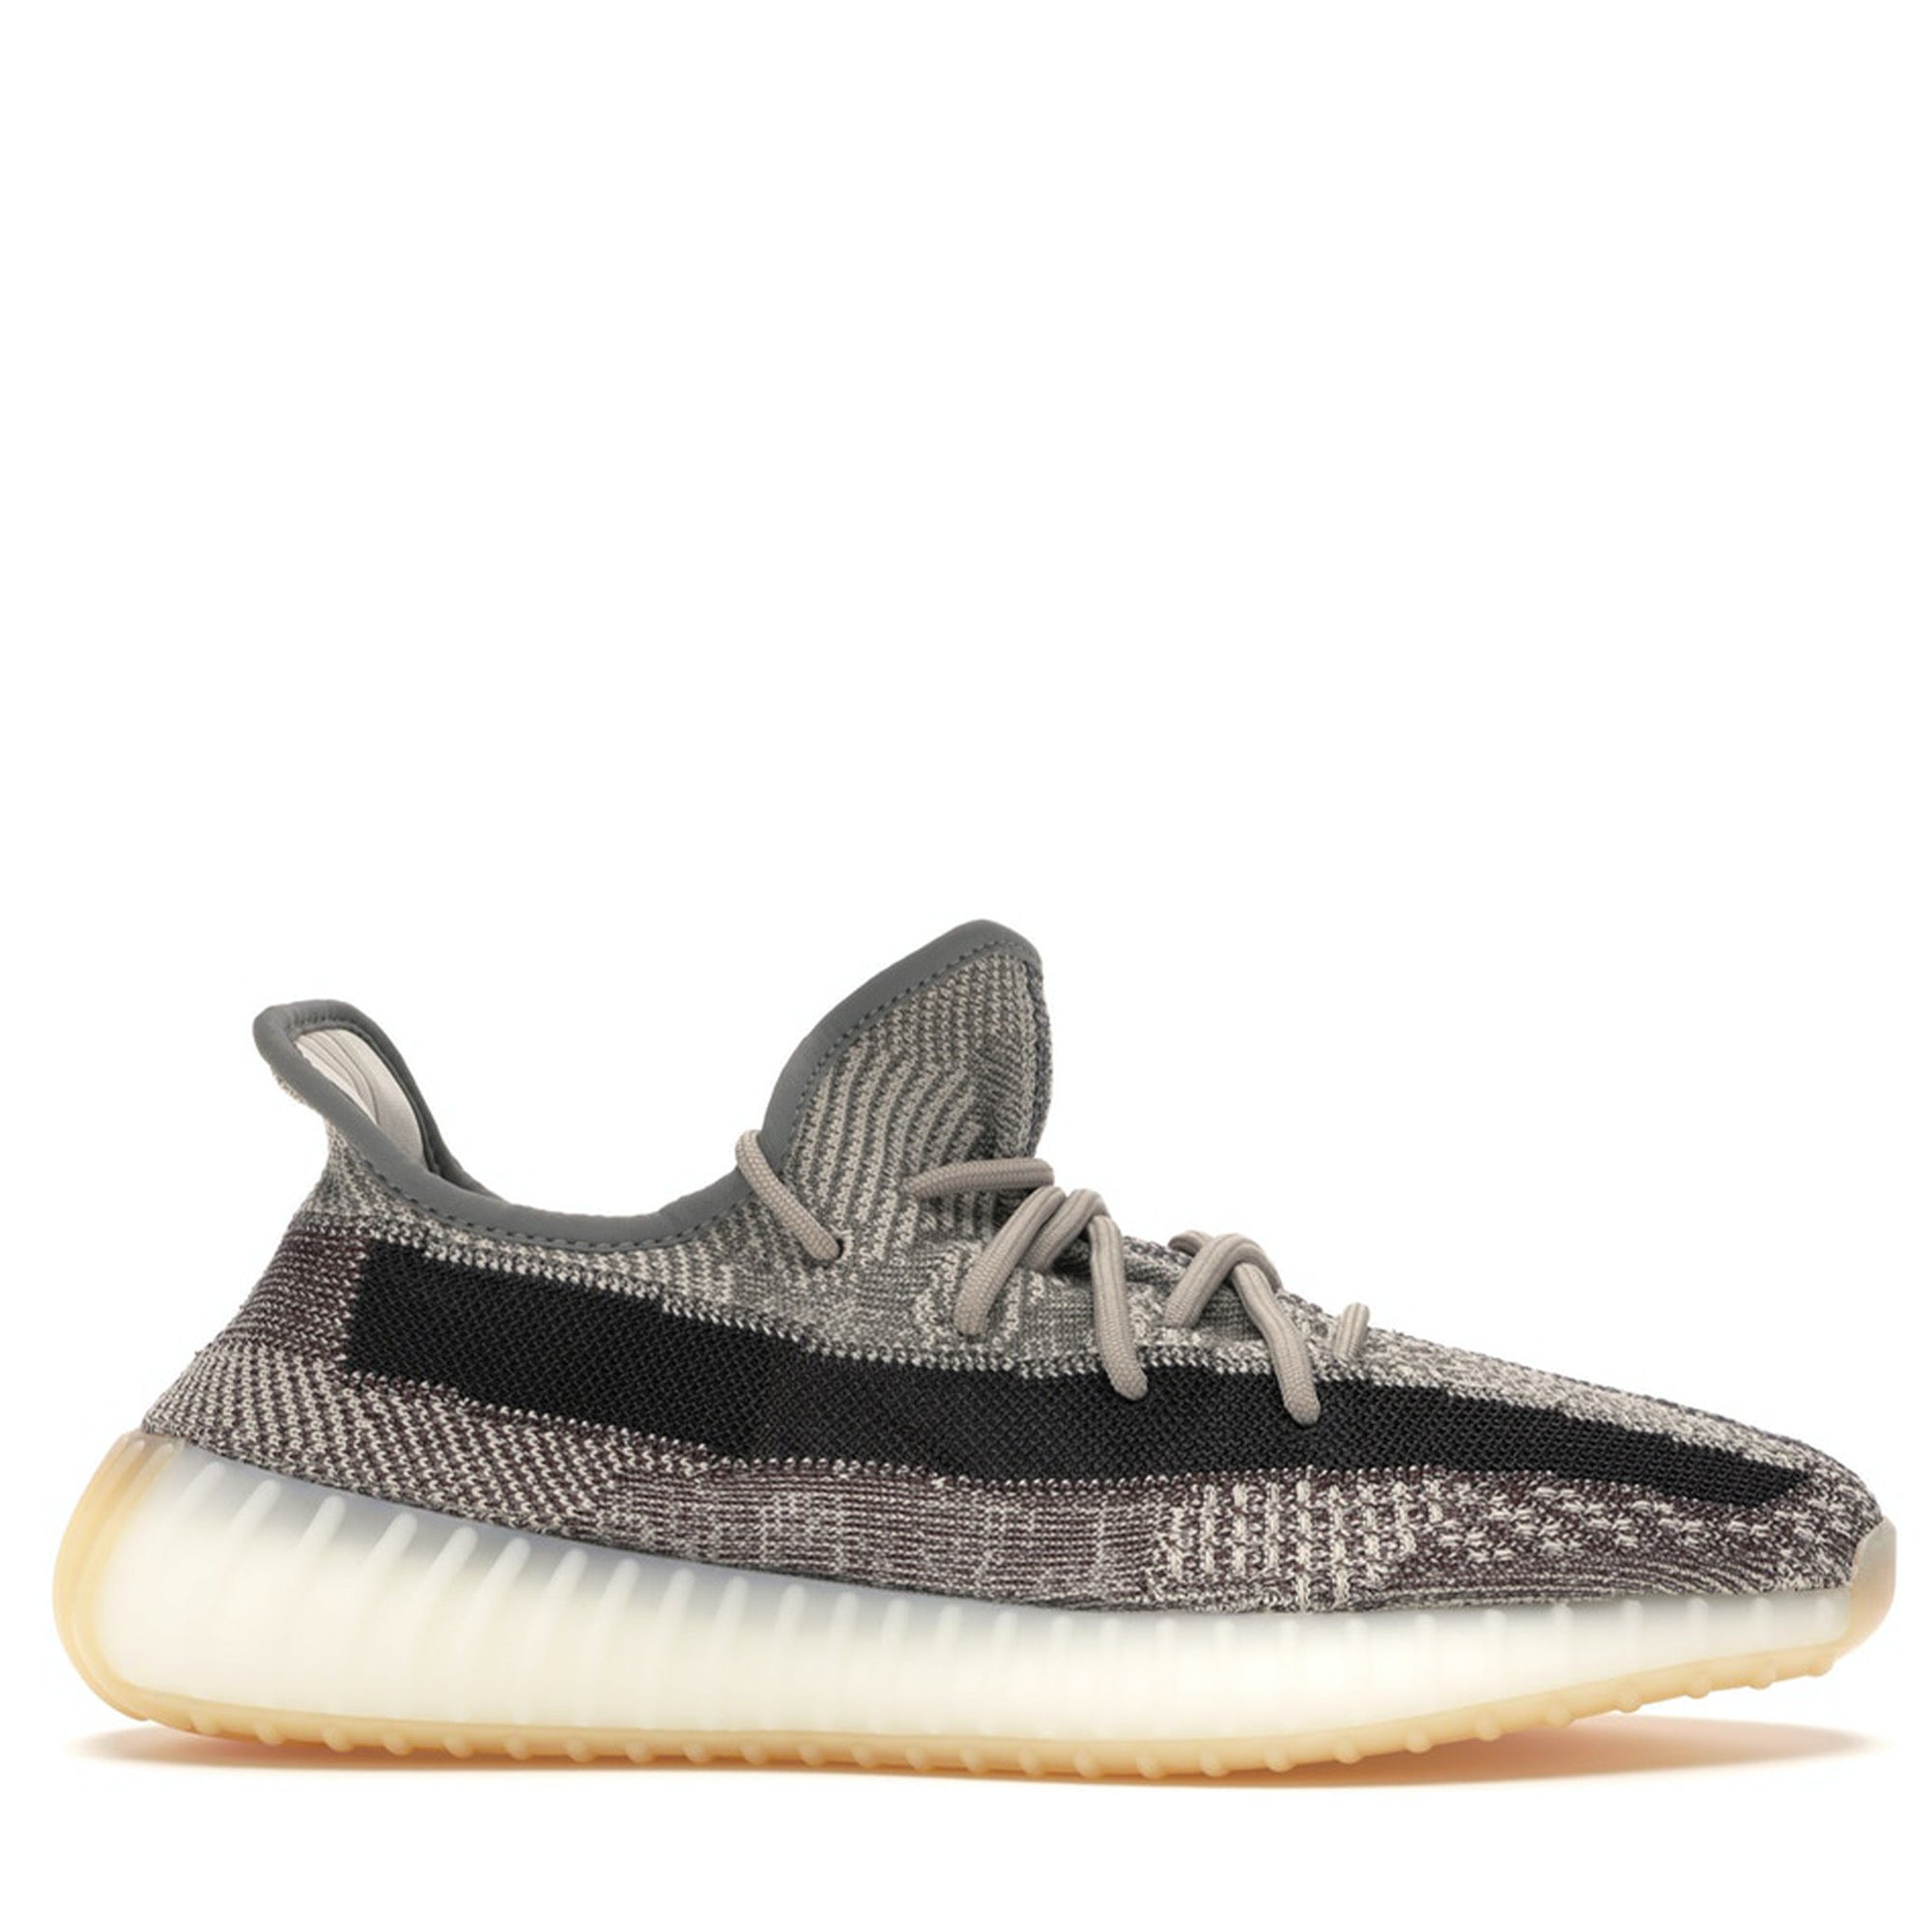 yeezy boost cost canada